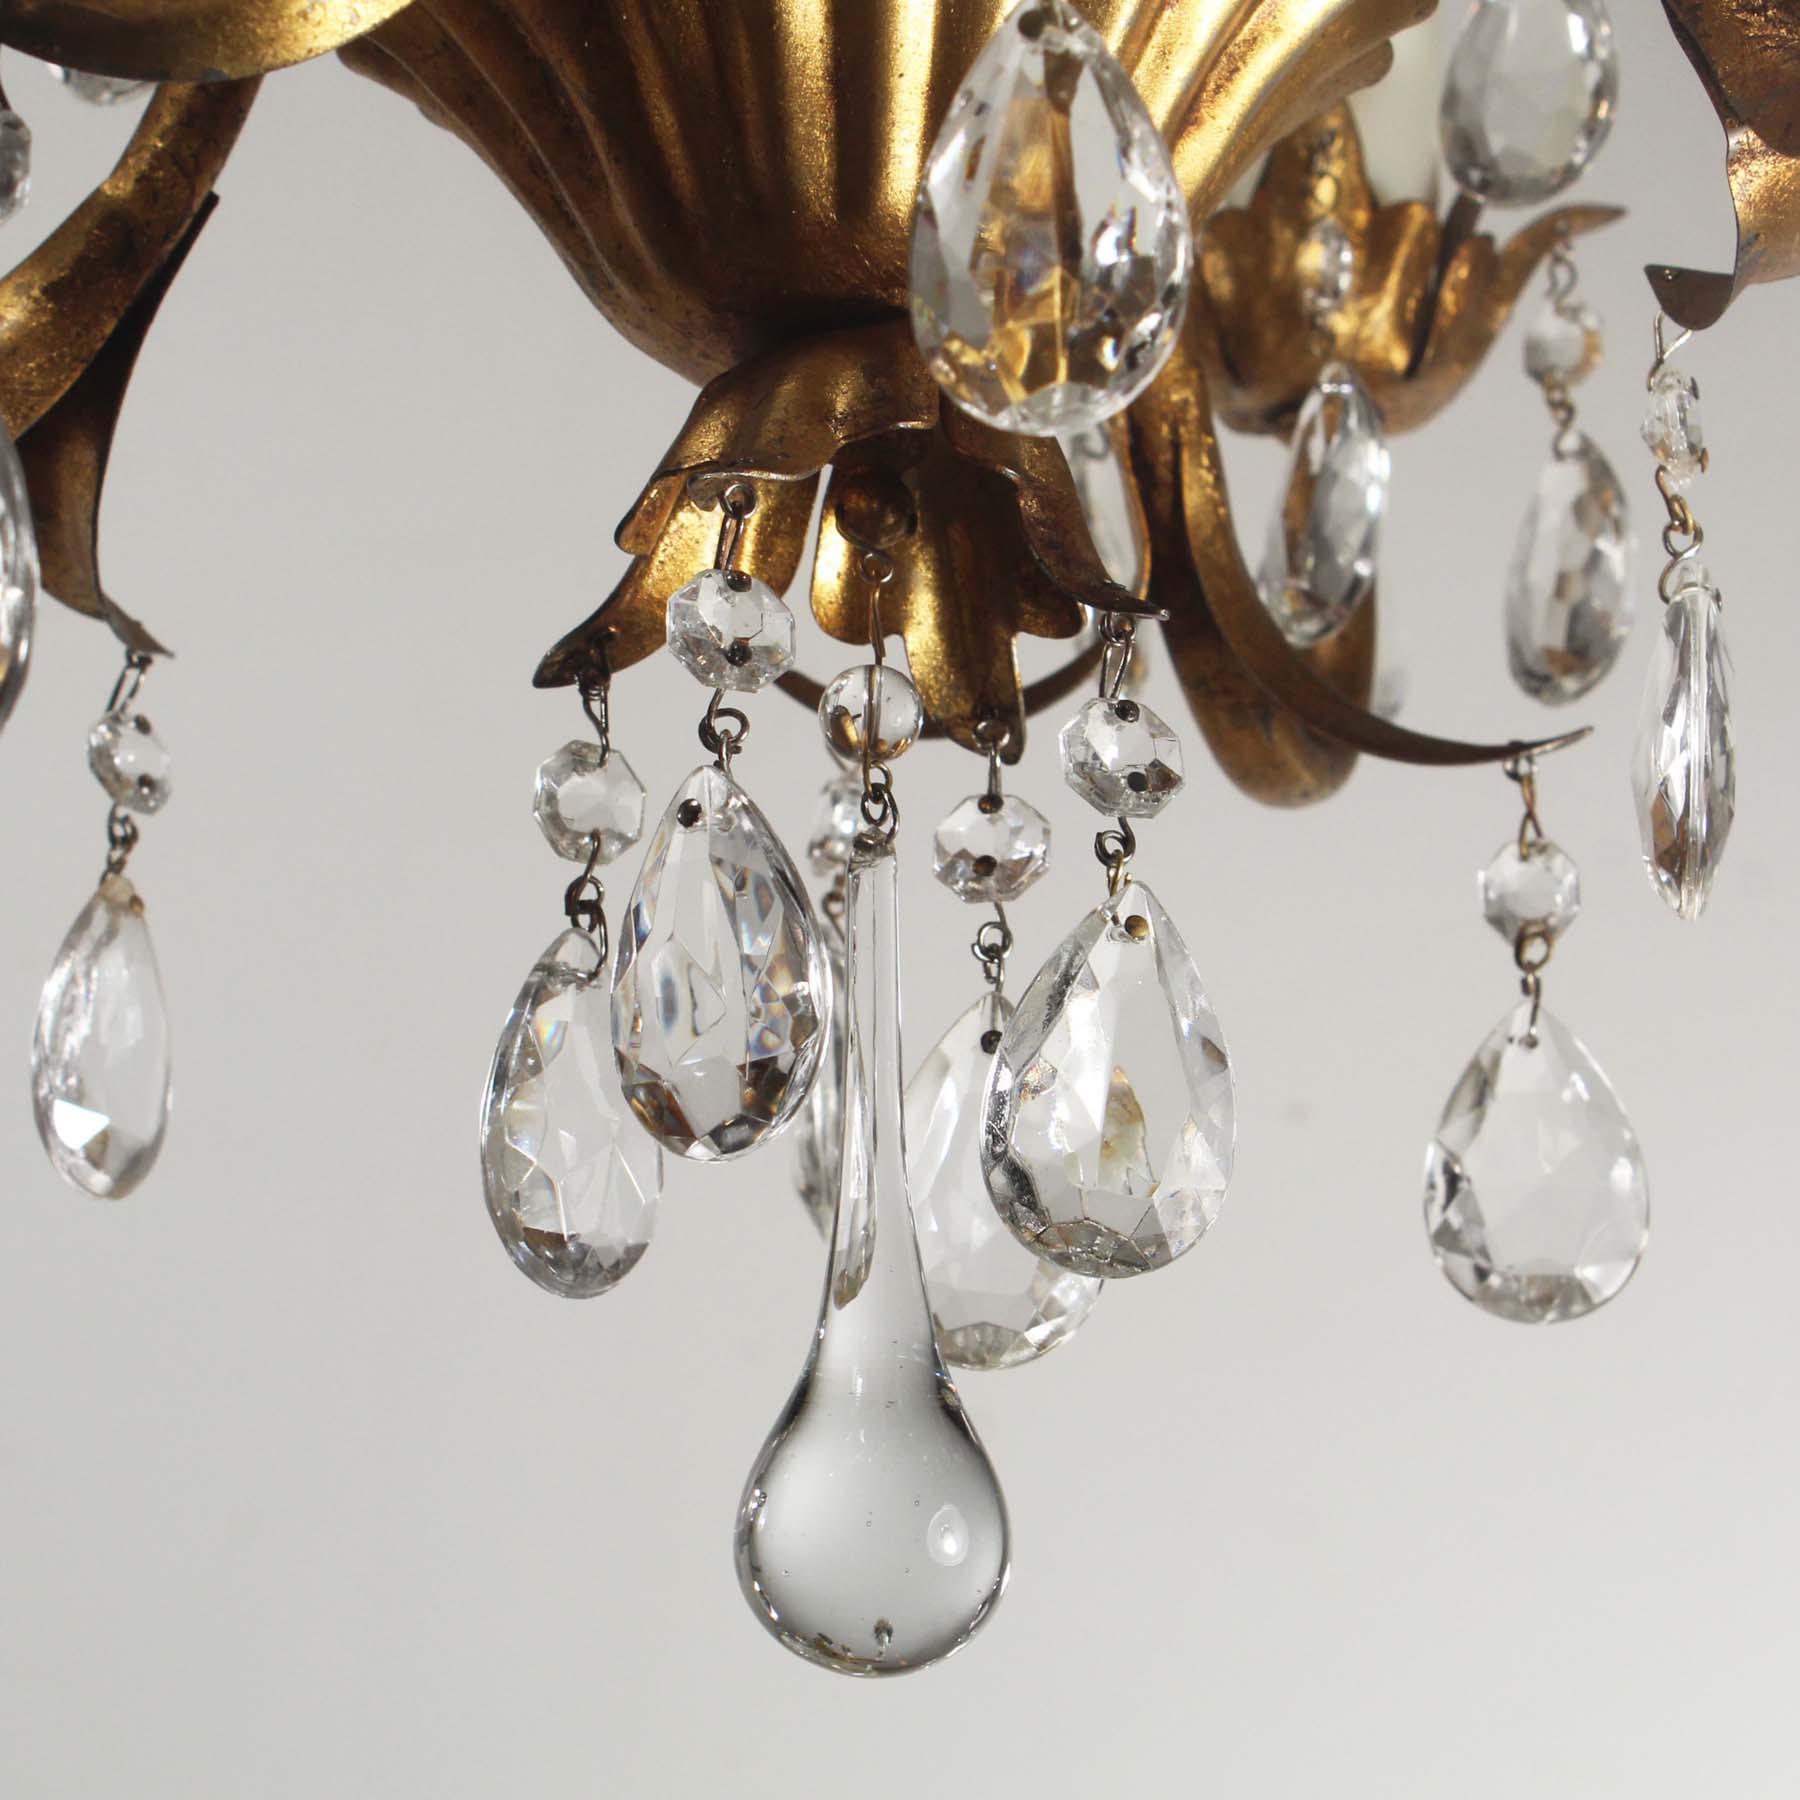 SOLD Vintage Neoclassical Brass Chandelier with Prisms-67531